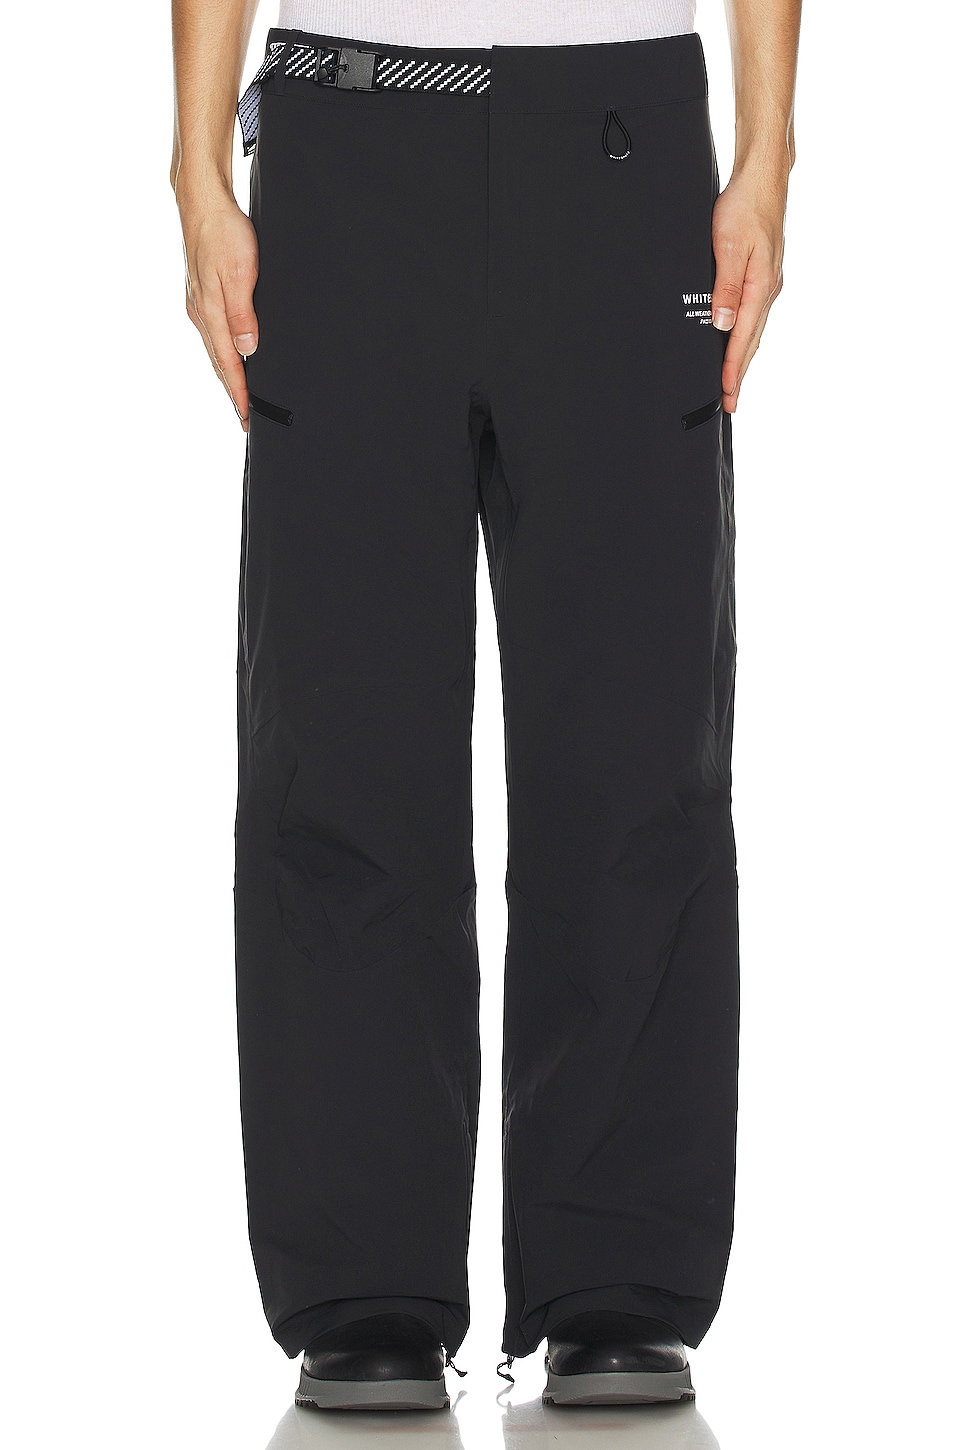 Image 1 of Whitespace 3l Performance Pant in Black